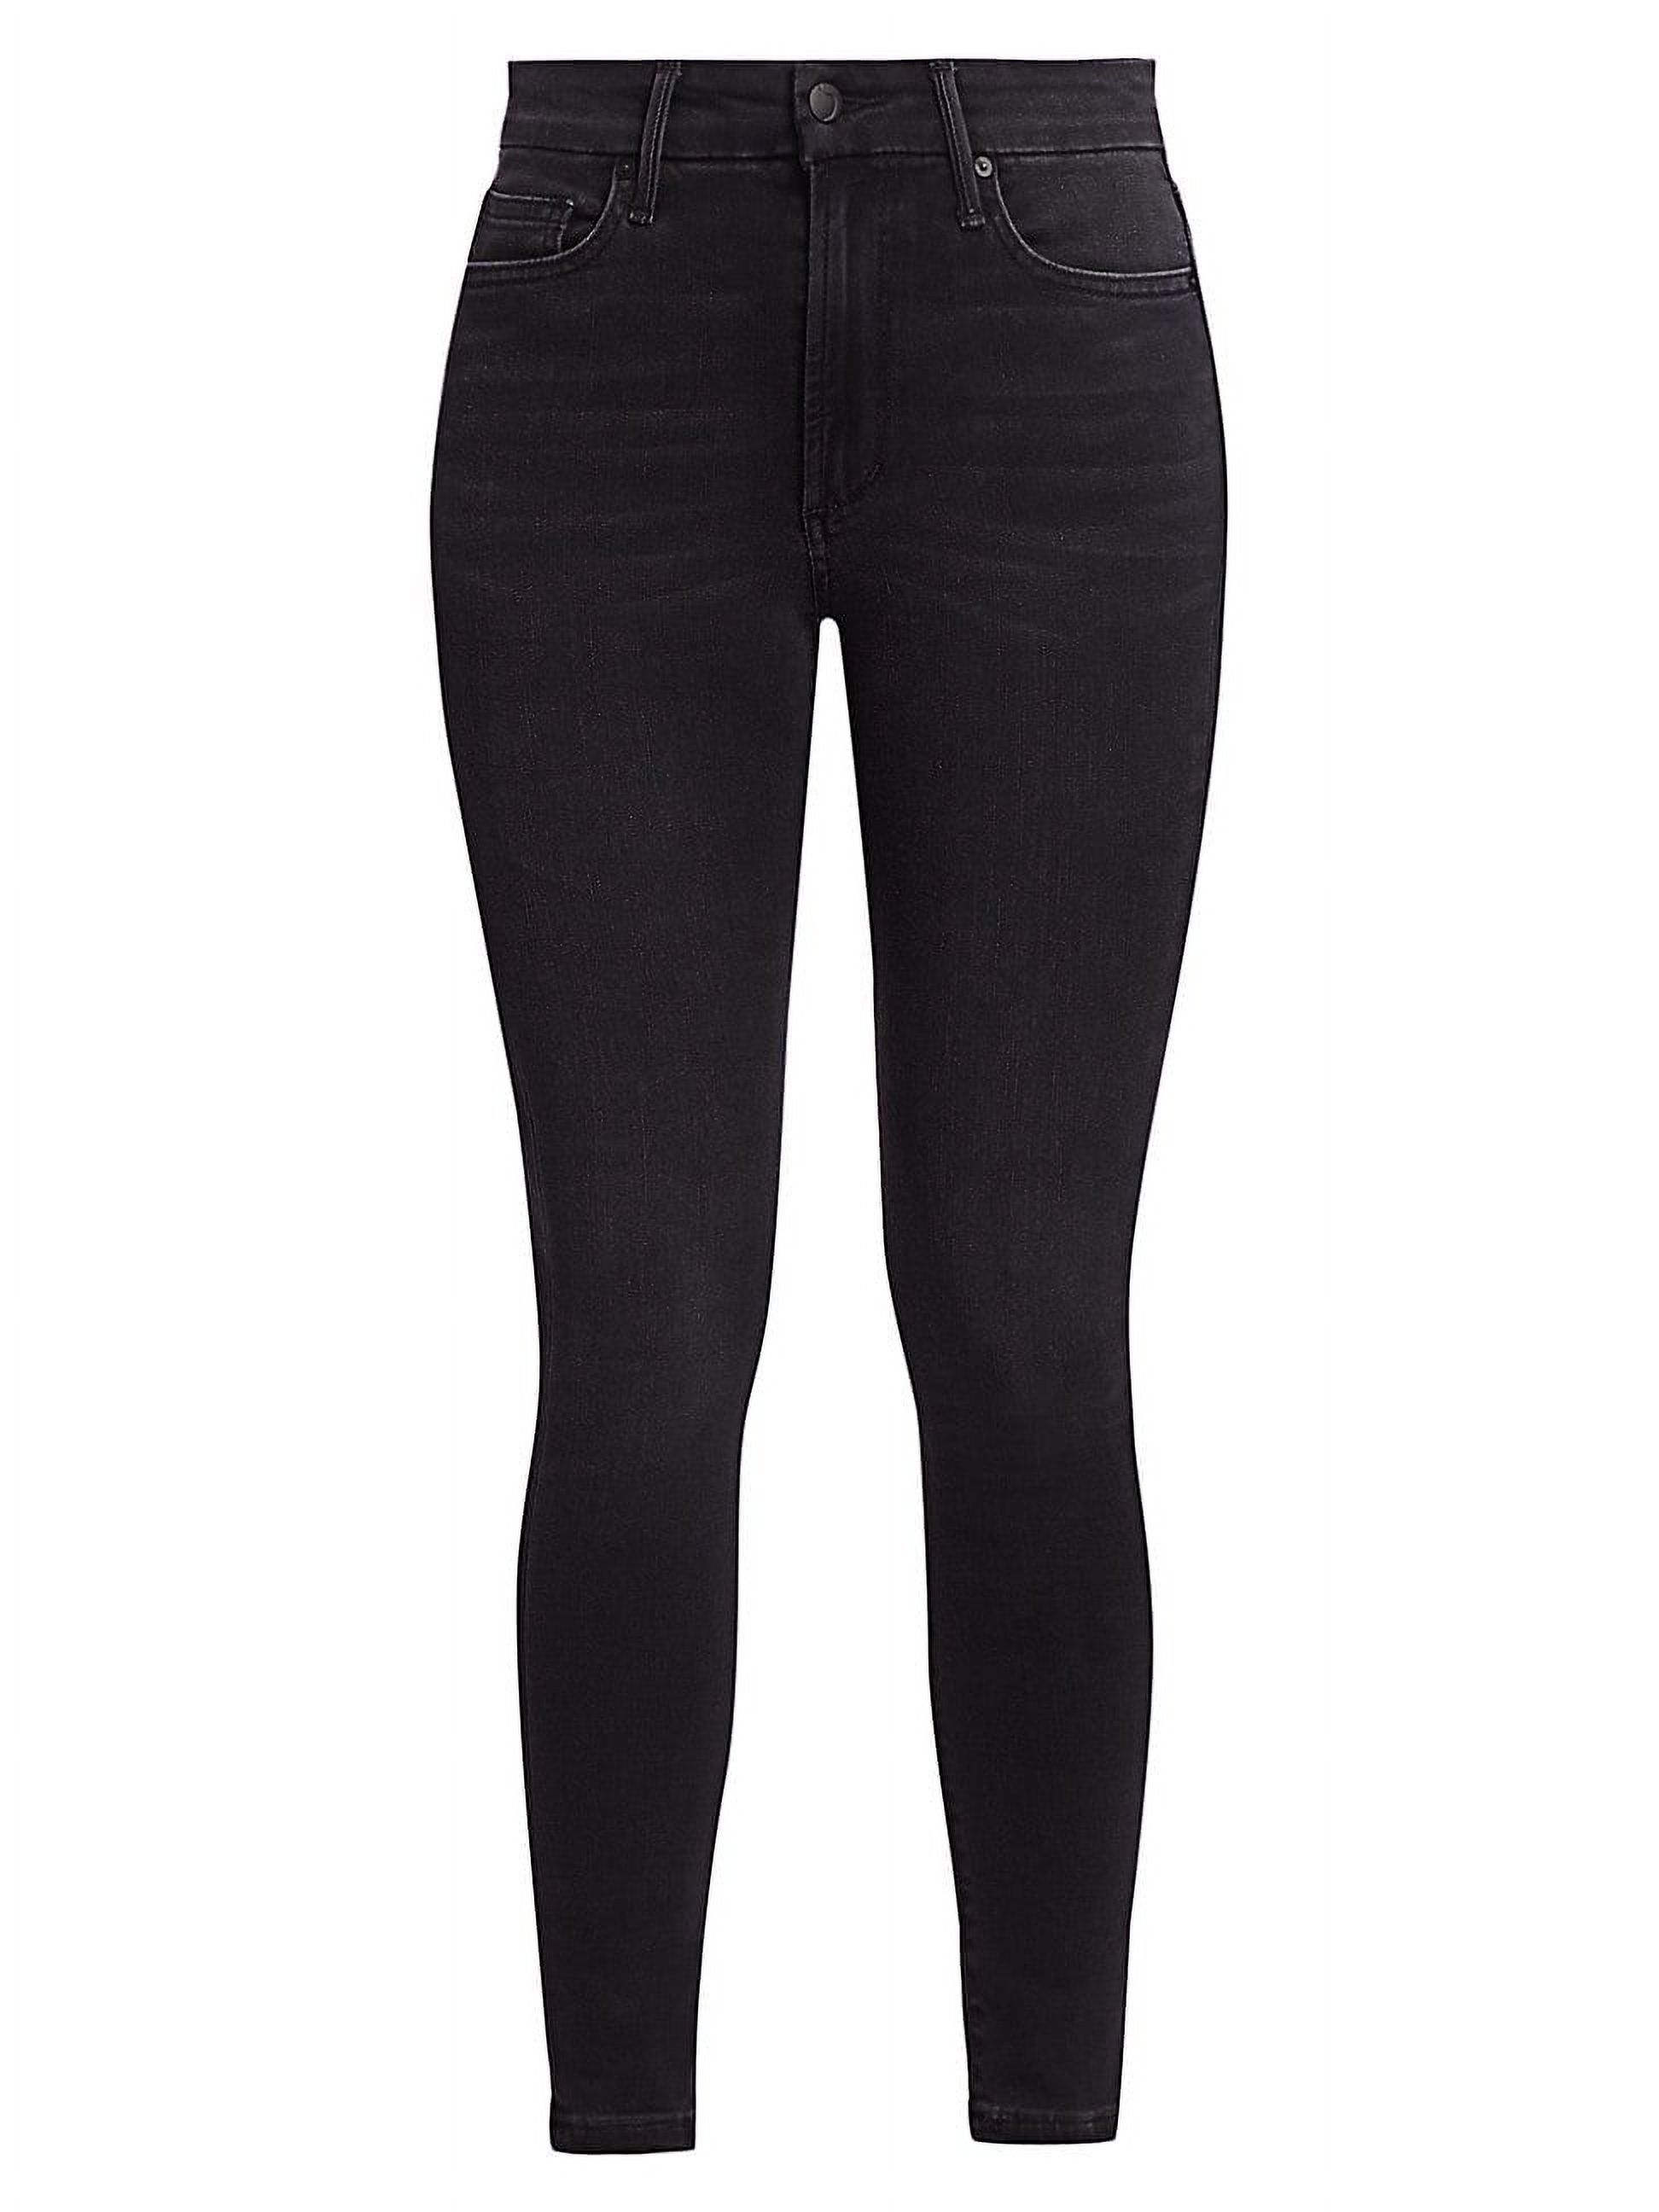 The Charlie Ankle Skinny Jeans In Hayward - image 1 of 2